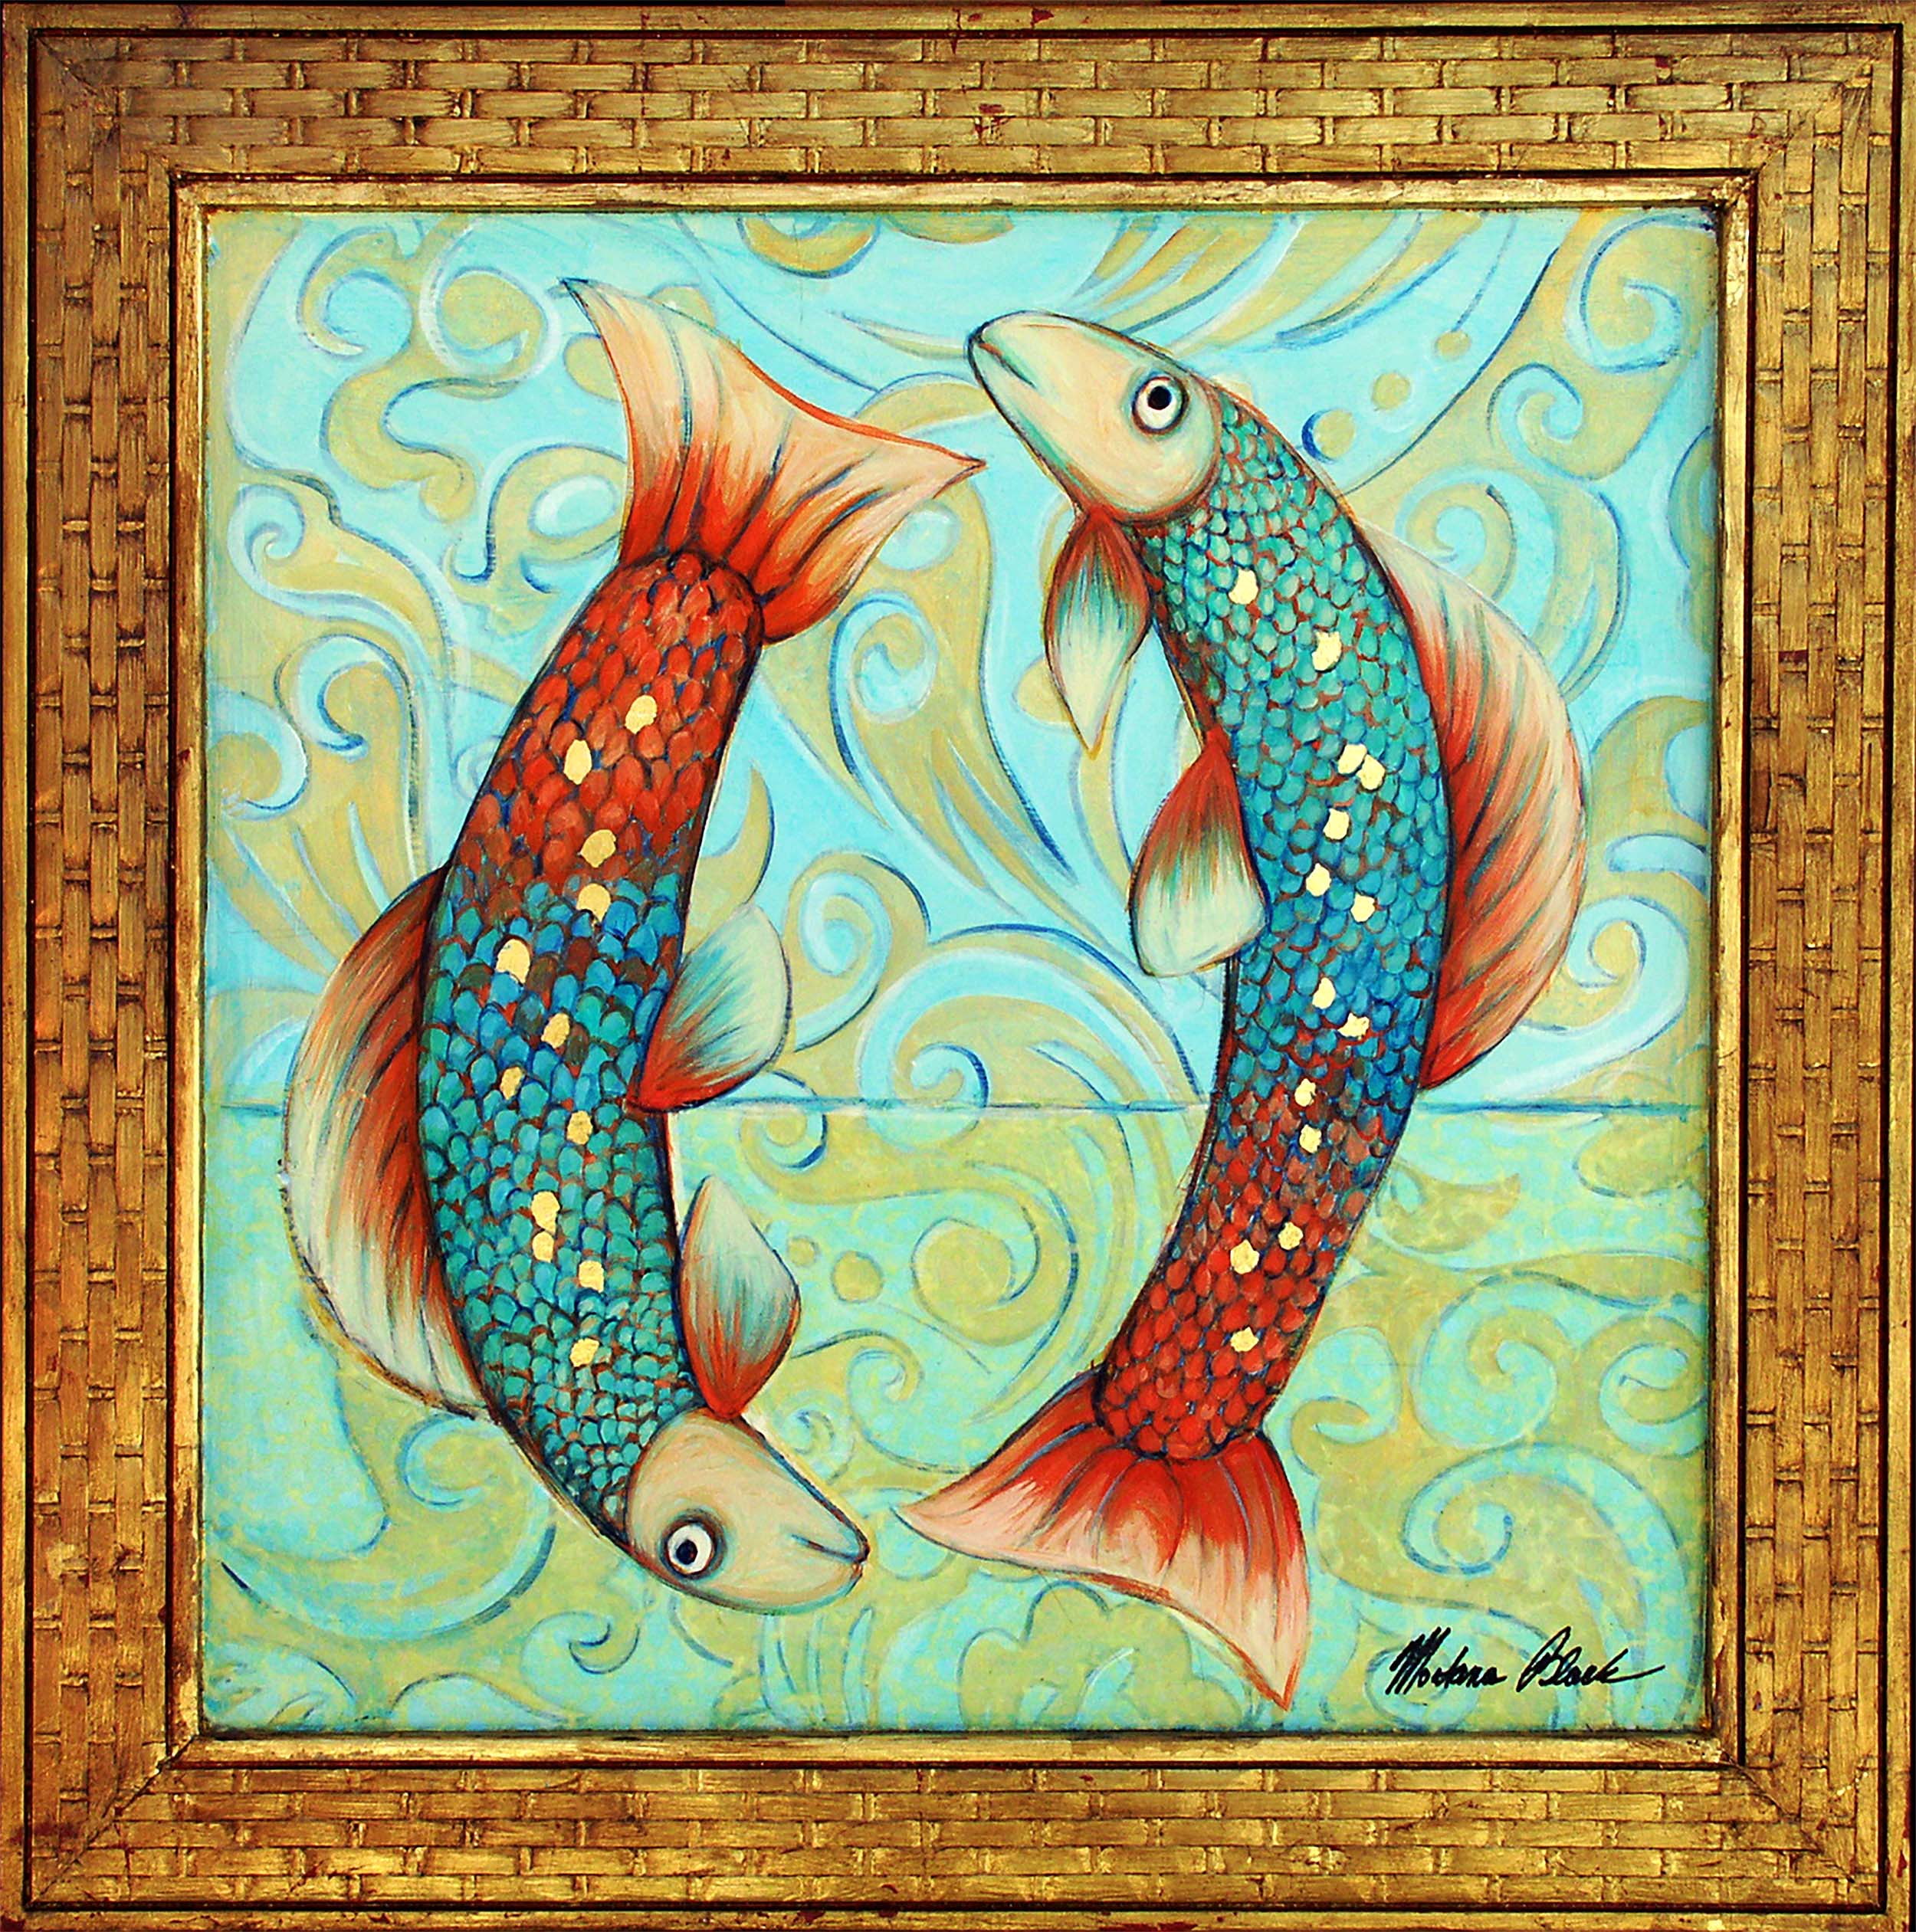 Pisces art work - two brightly colored fish on a aqua blue patterned background